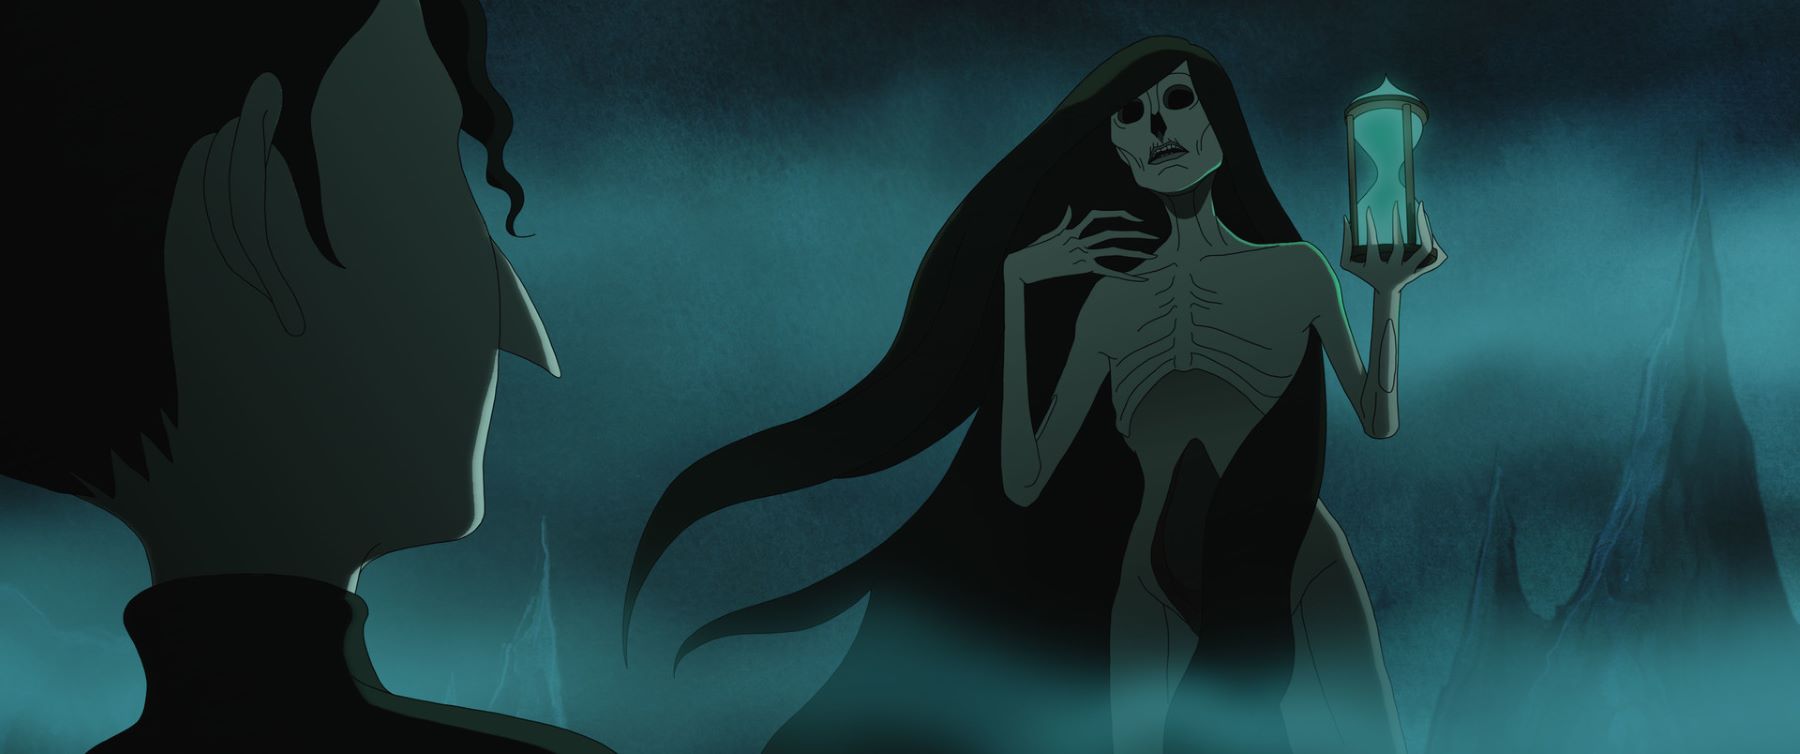 Still from animated film showing death, as a woman, holding up an hourglass